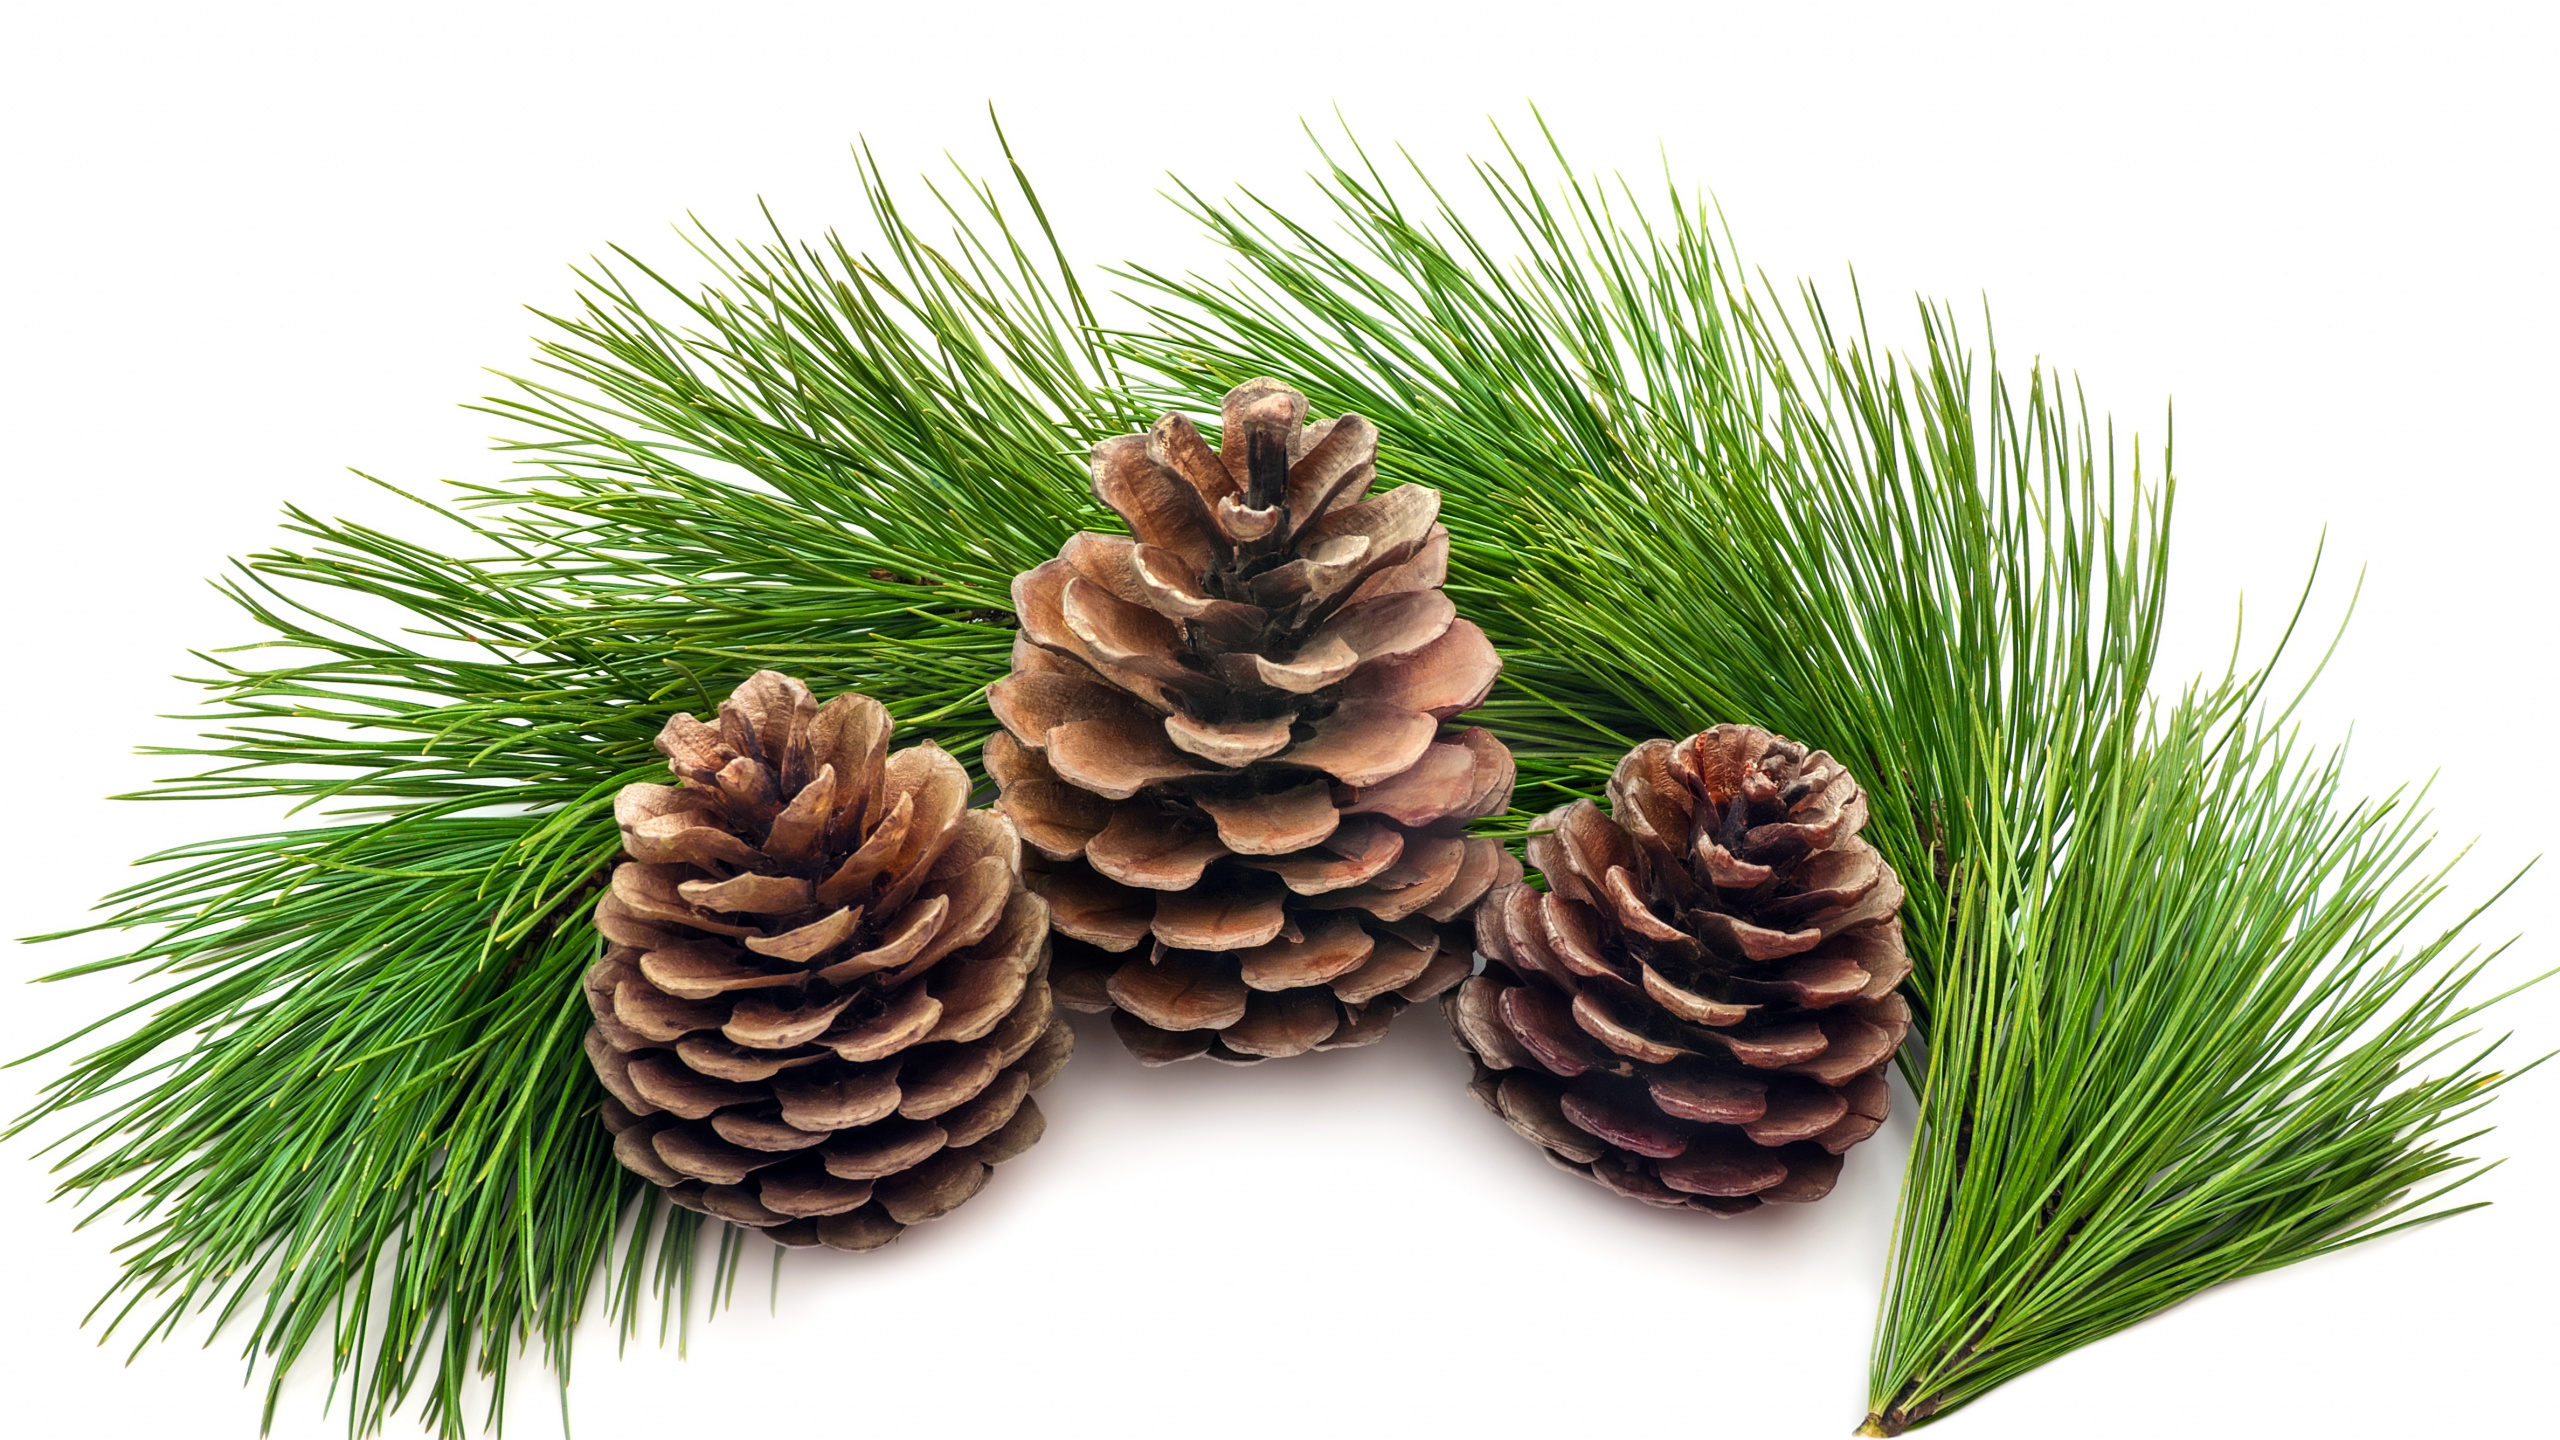 Brown Pine Cone on White Background. Wallpaper in 2560x1440 Resolution